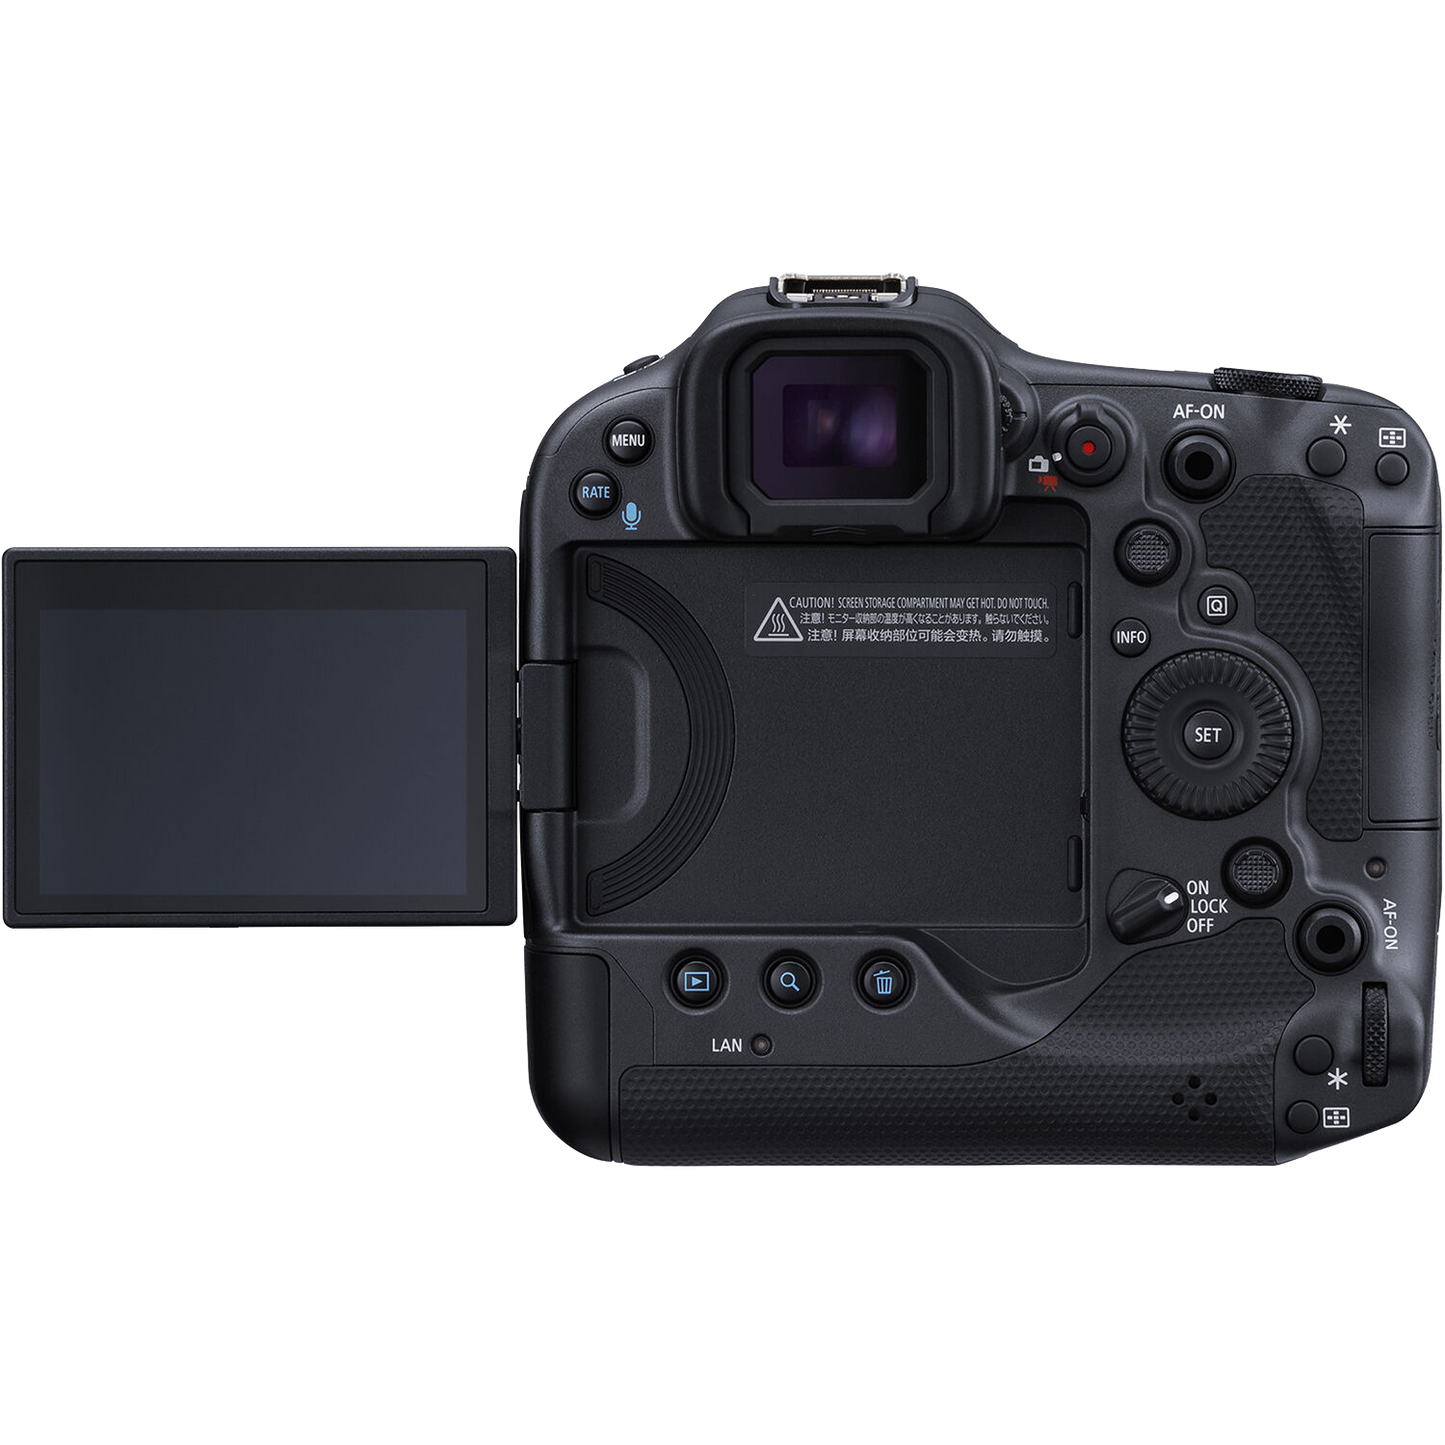 Canon EOS R3 Mirrorless Camera (Body only)